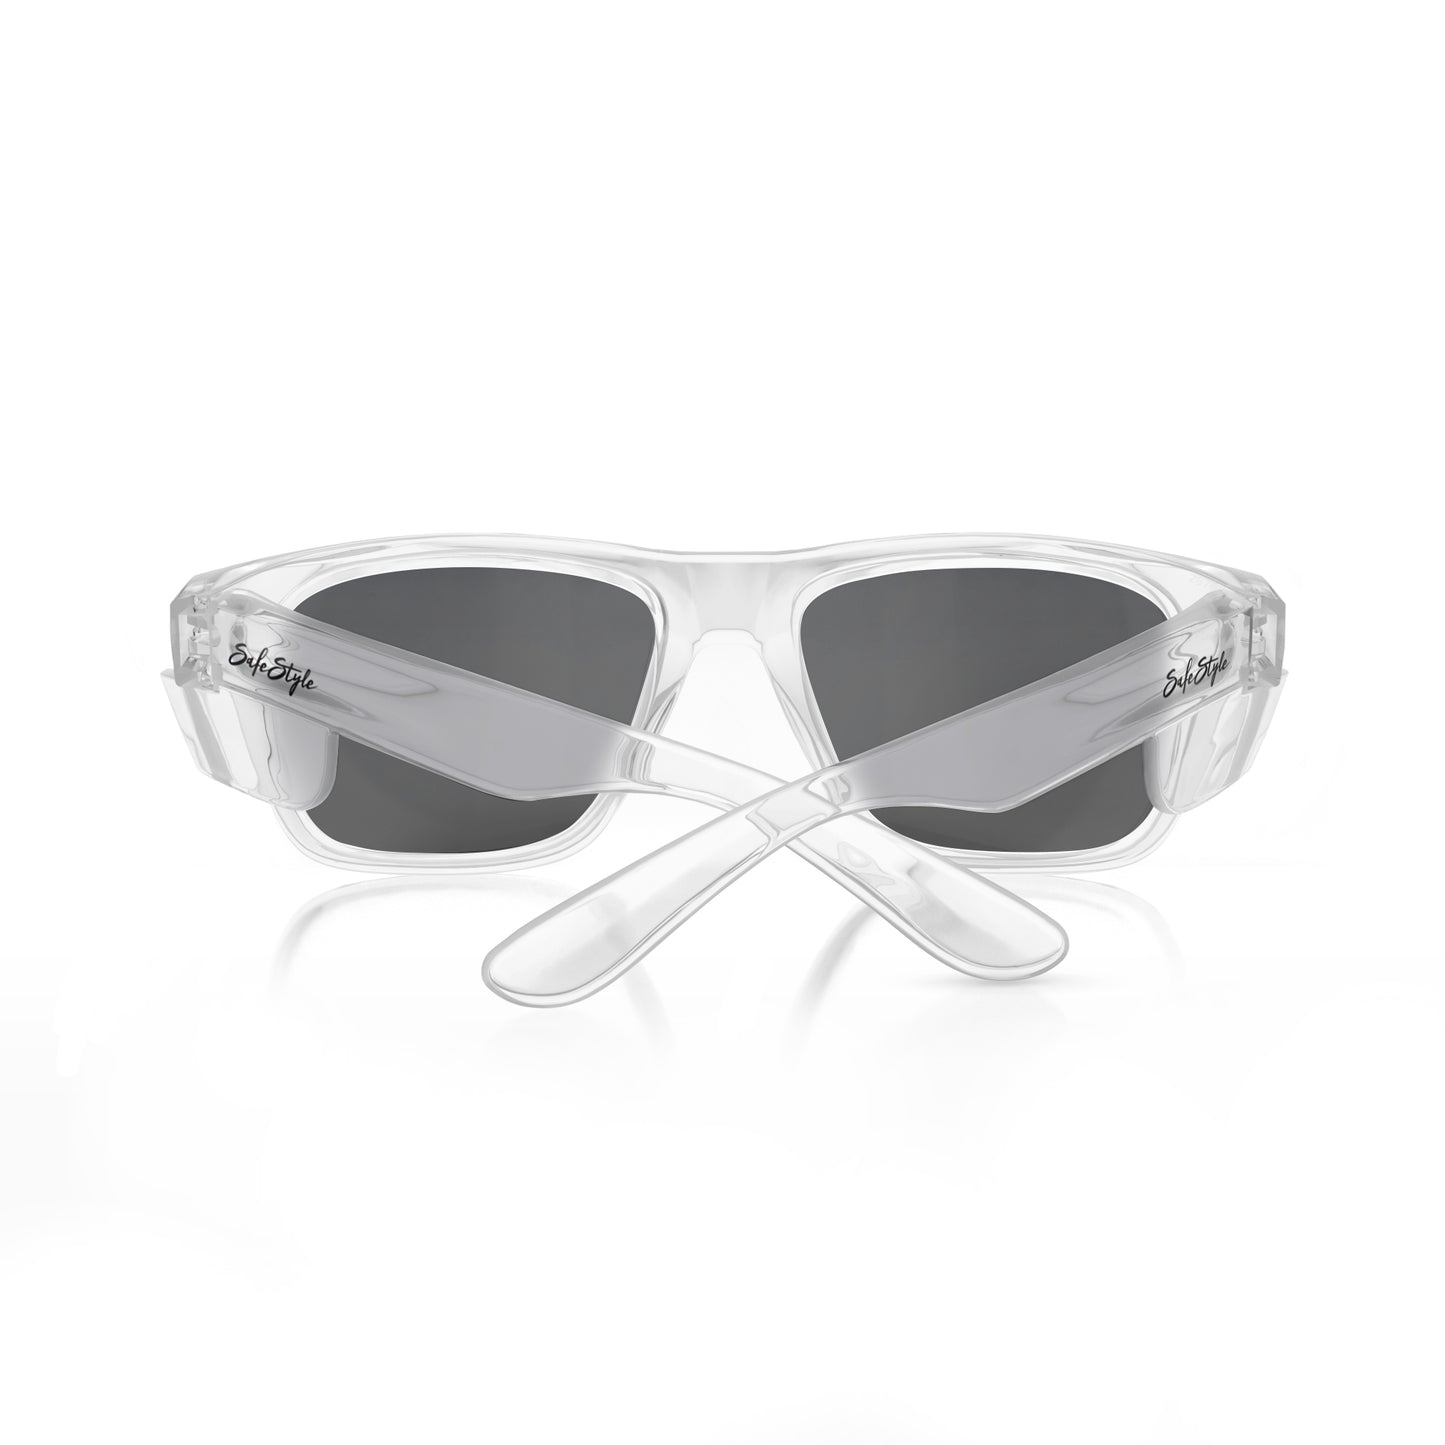 SafeStyle Fusions Clear Frame/Tinted UV400